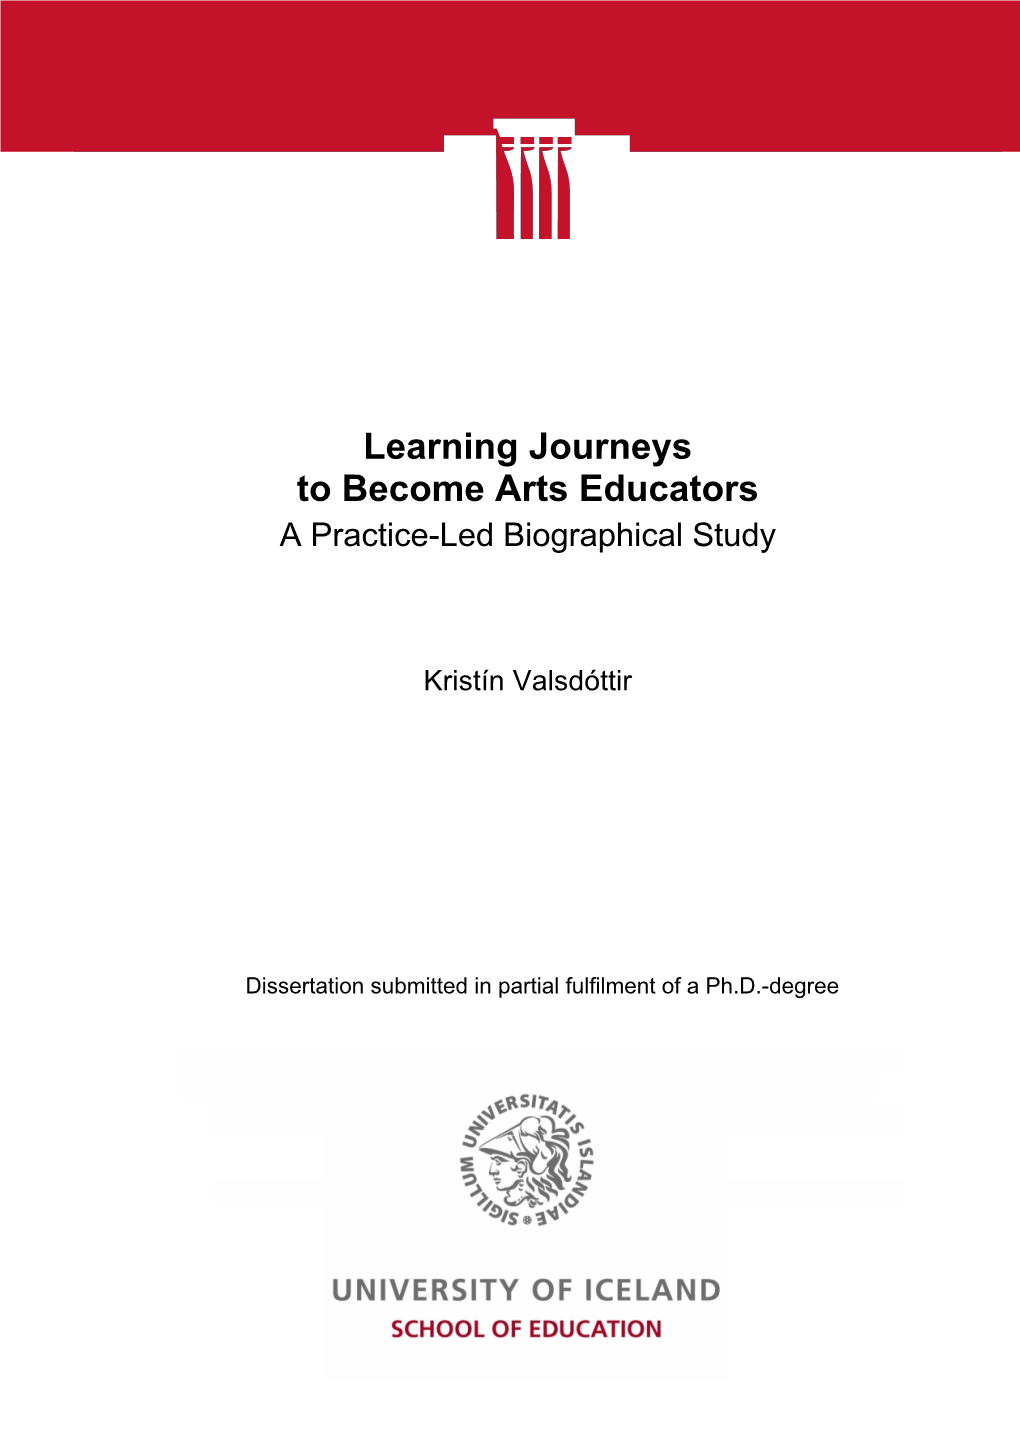 Learning Journeys to Become Arts Educators a Practice-Led Biographical Study